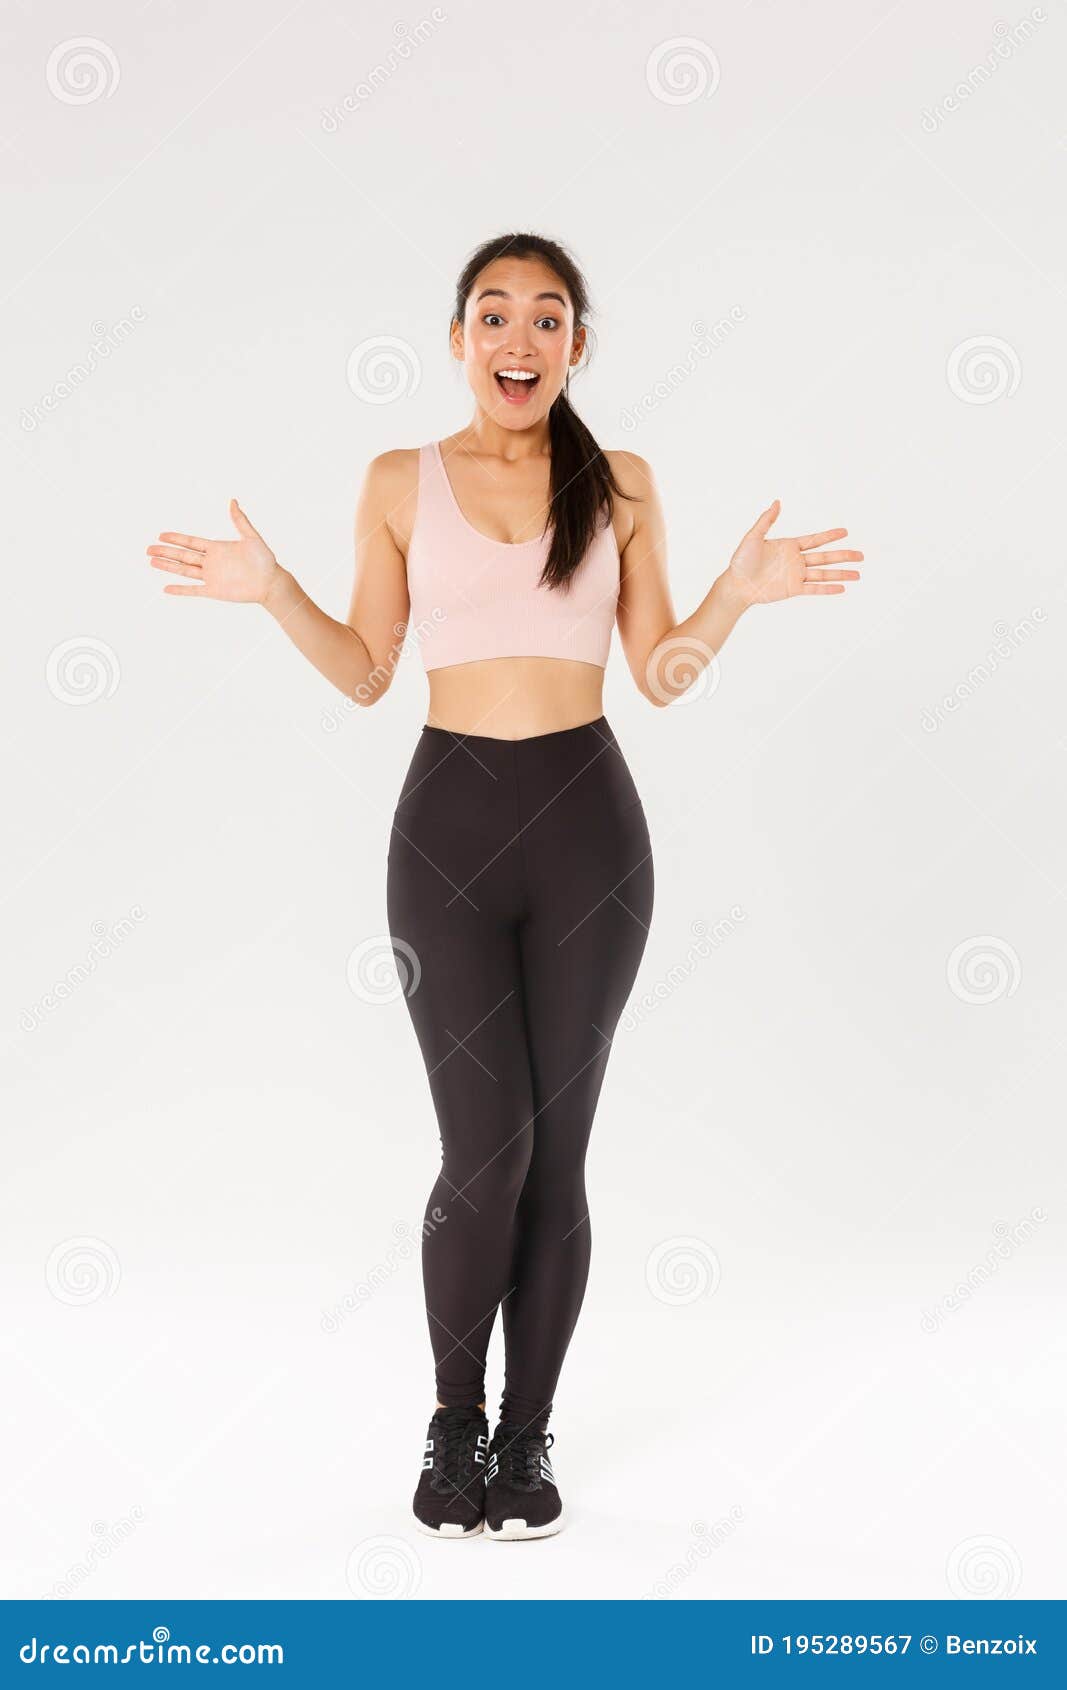 Full Length of Surprised and Amazed Female Athelte, Asian Fitness Girl in  Sportsbra and Leggings Looking Wondered Stock Image - Image of  advertisement, face: 195289567